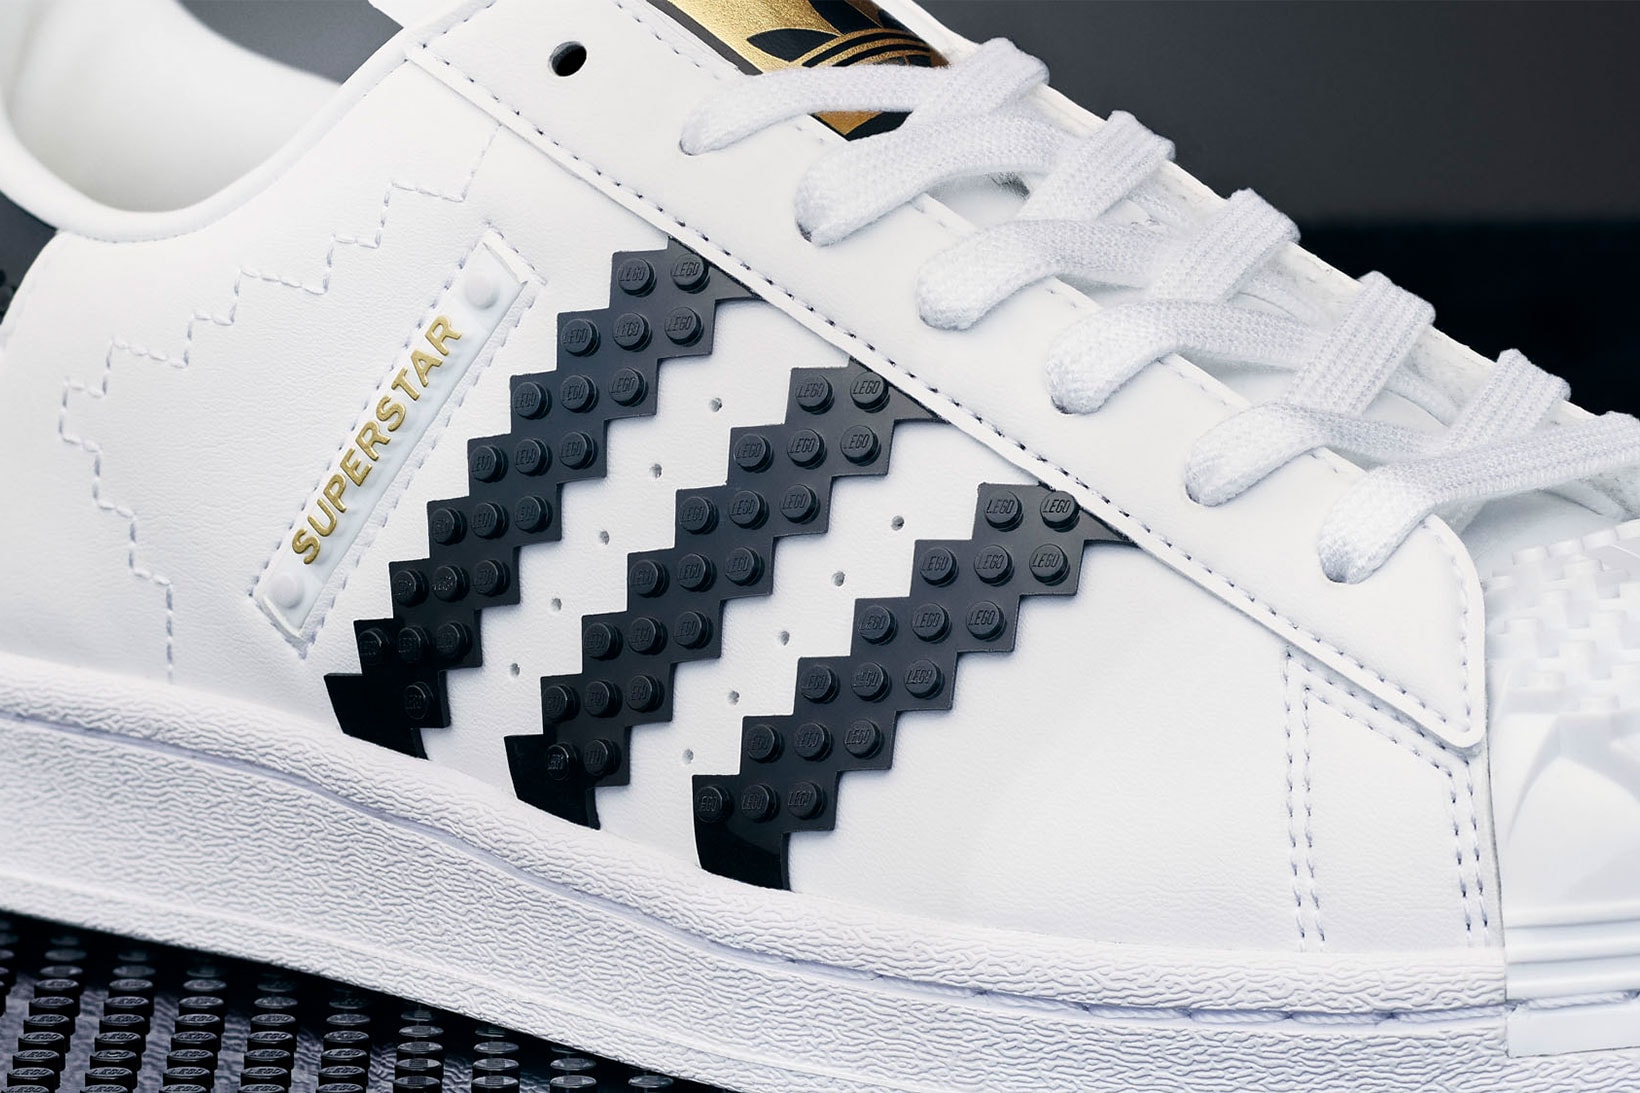 Today the Adidas Superstar Lego Set Drop. Two shoes: one to wear